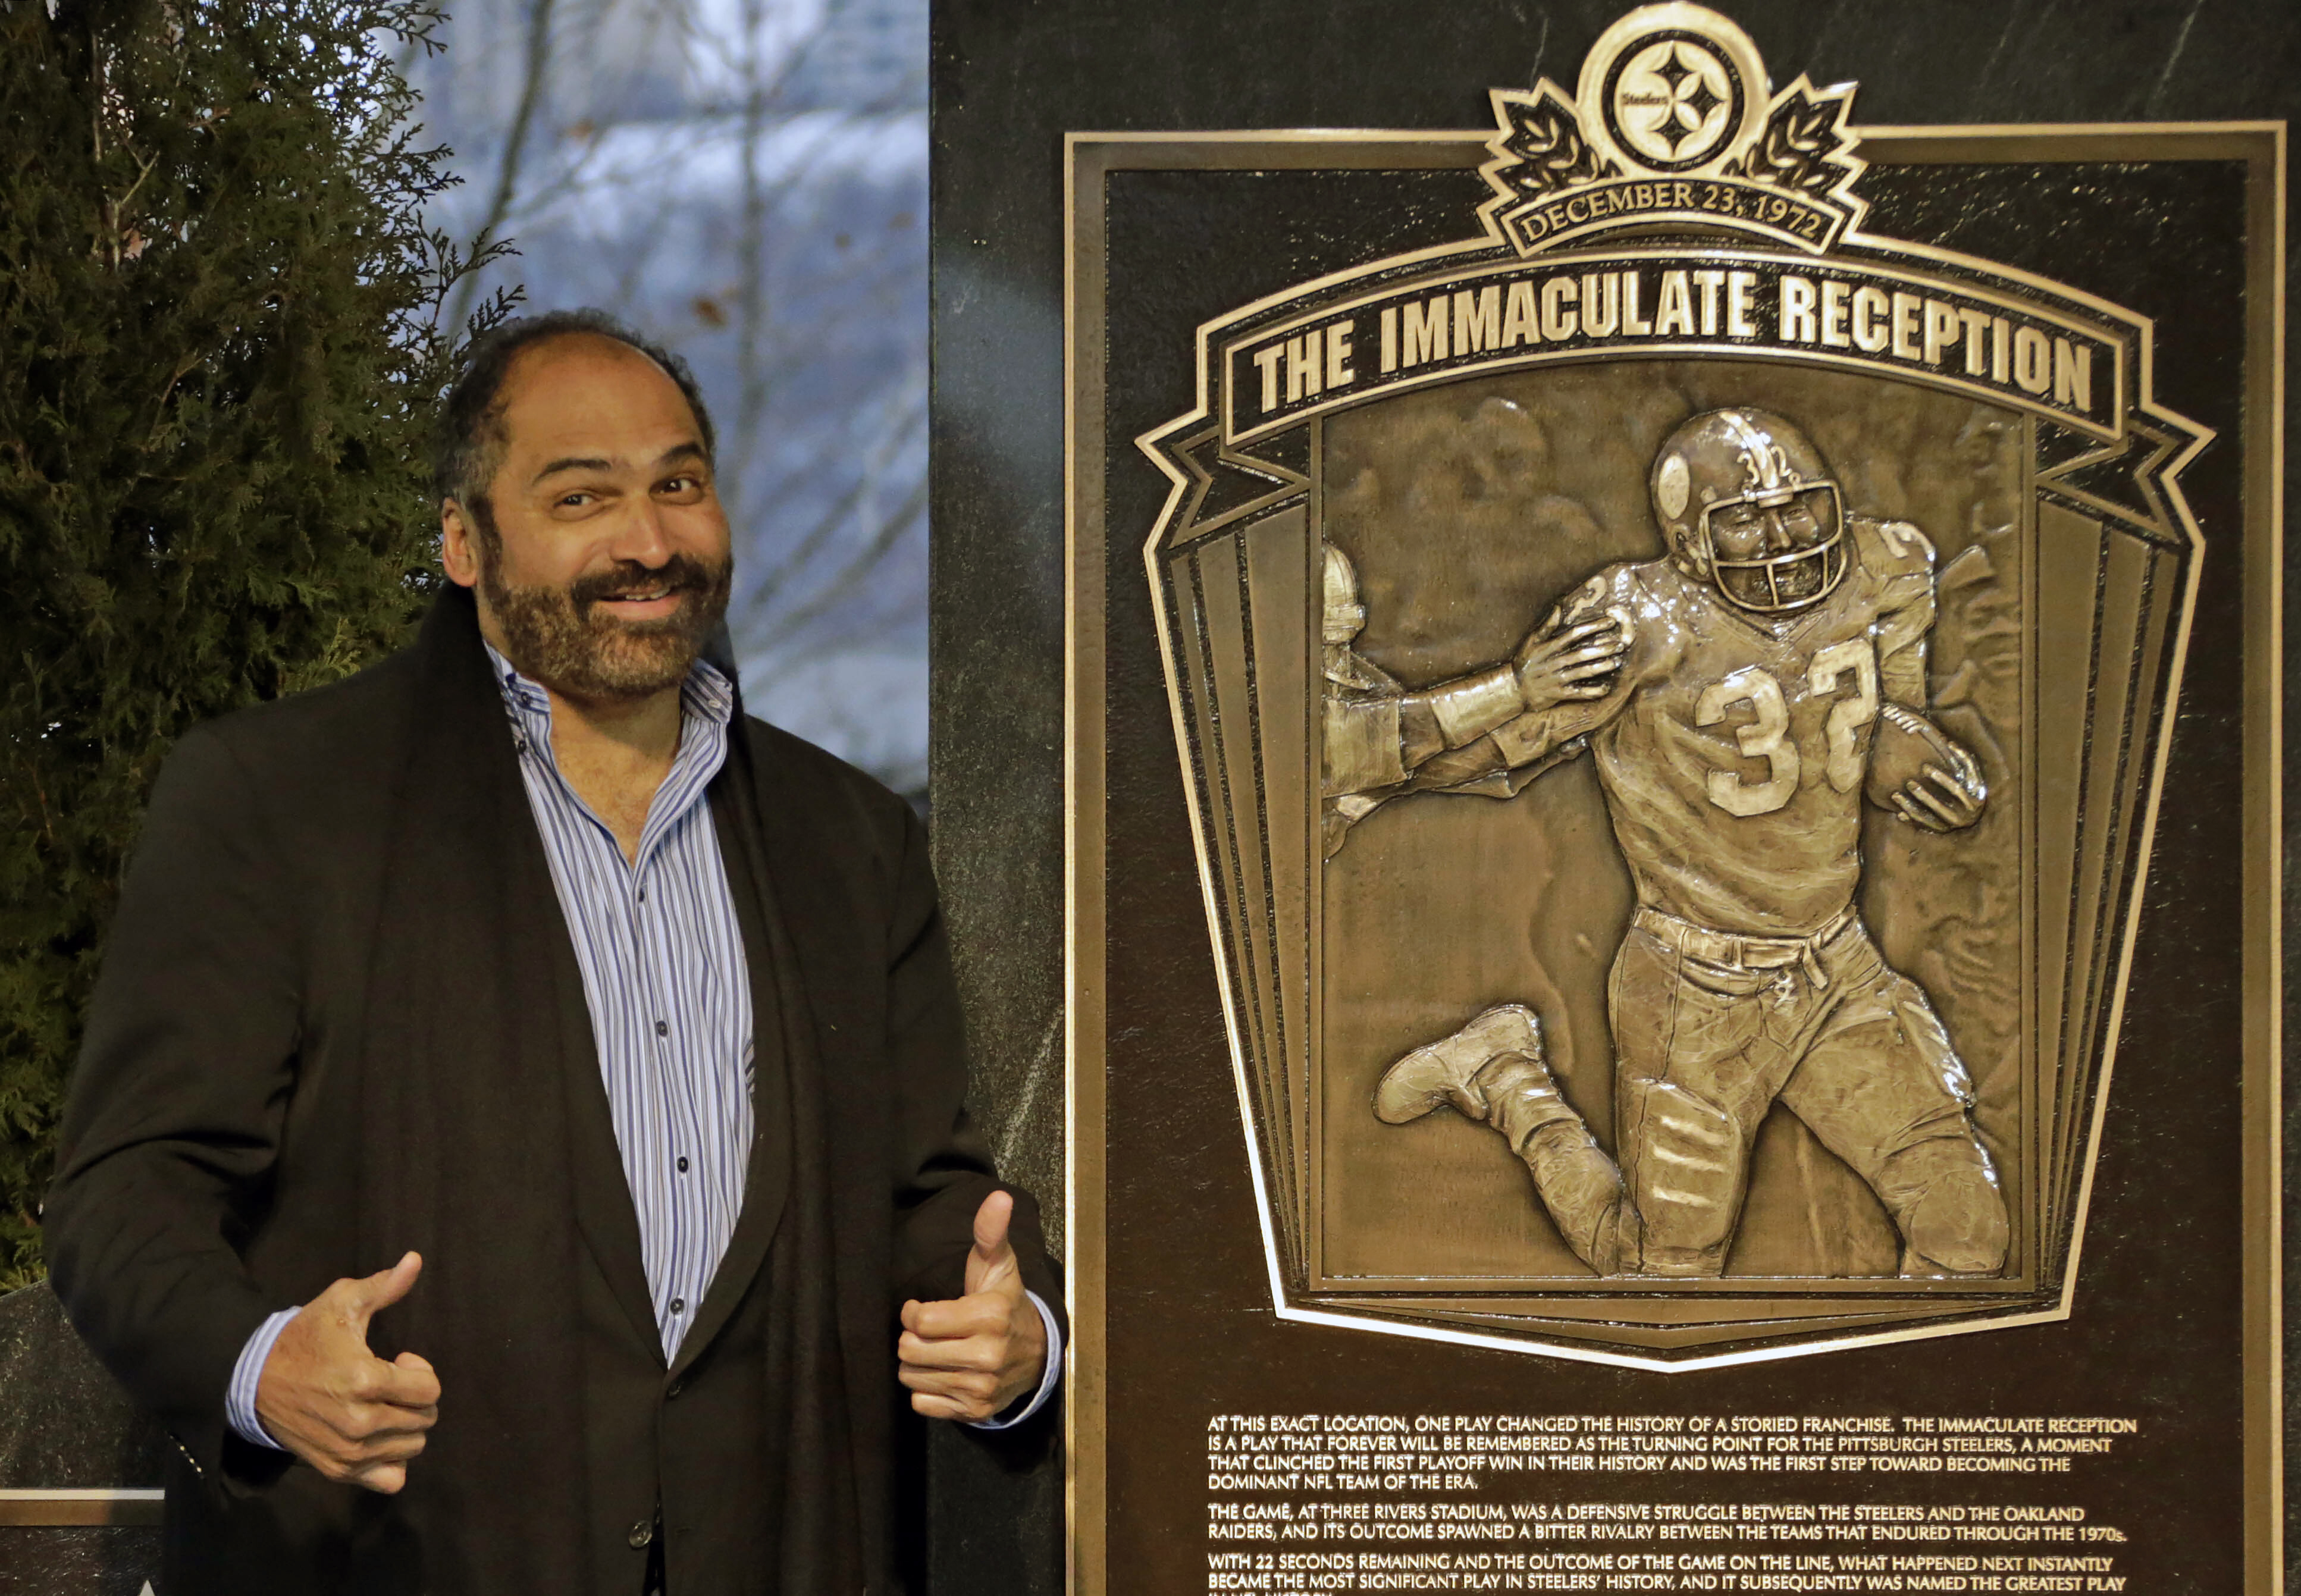 Pittsburgh Steelers' Franco Harris was a cultural touchstone